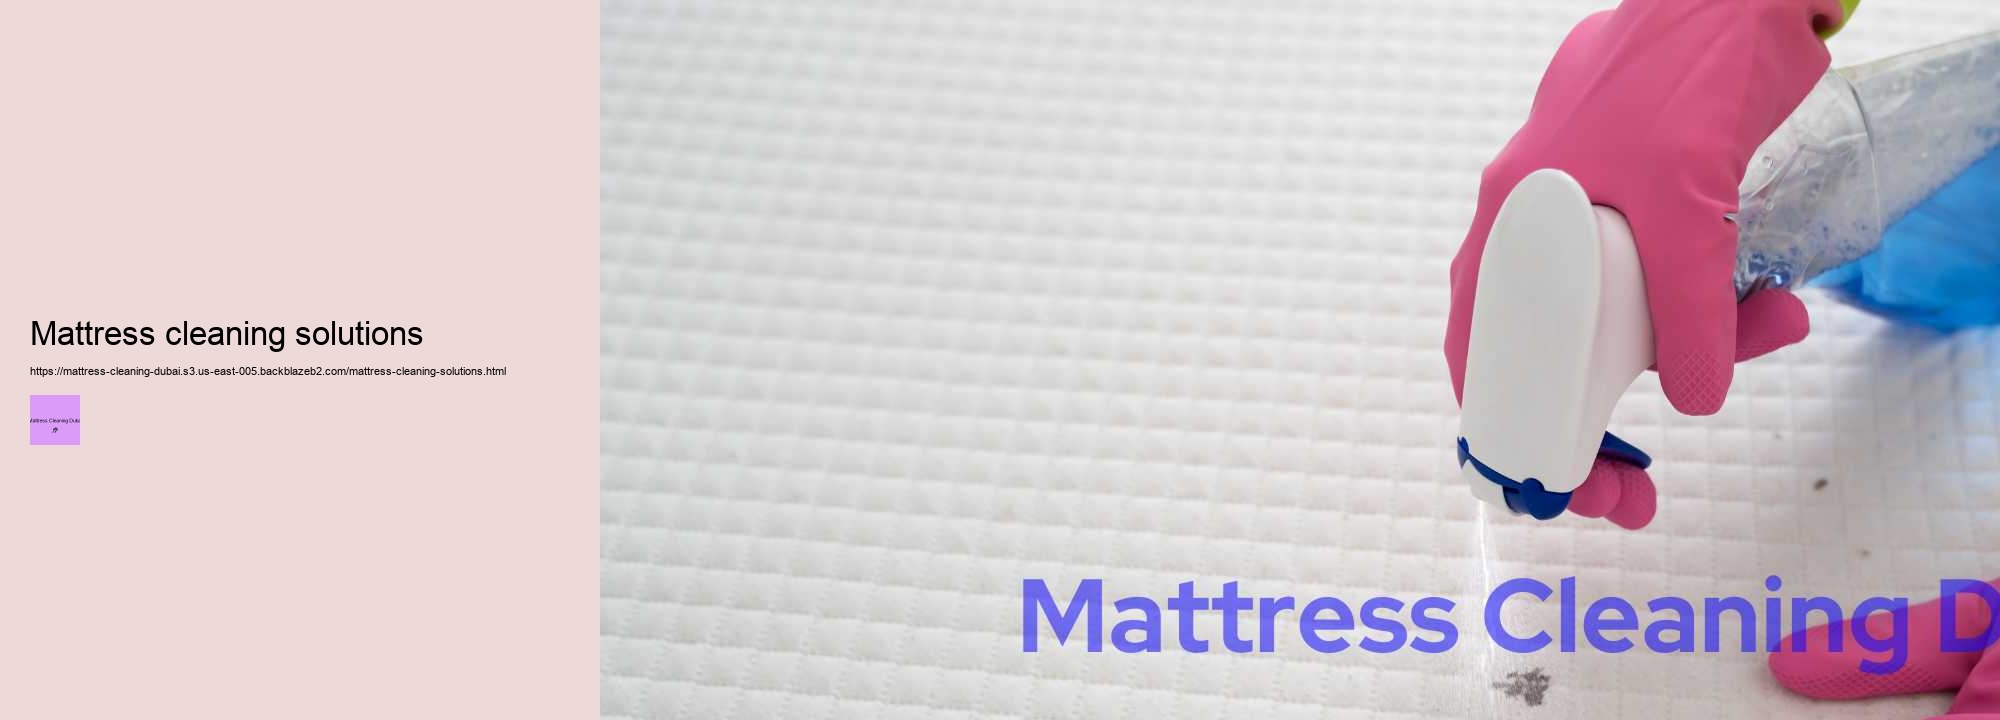 Mattress cleaning solutions